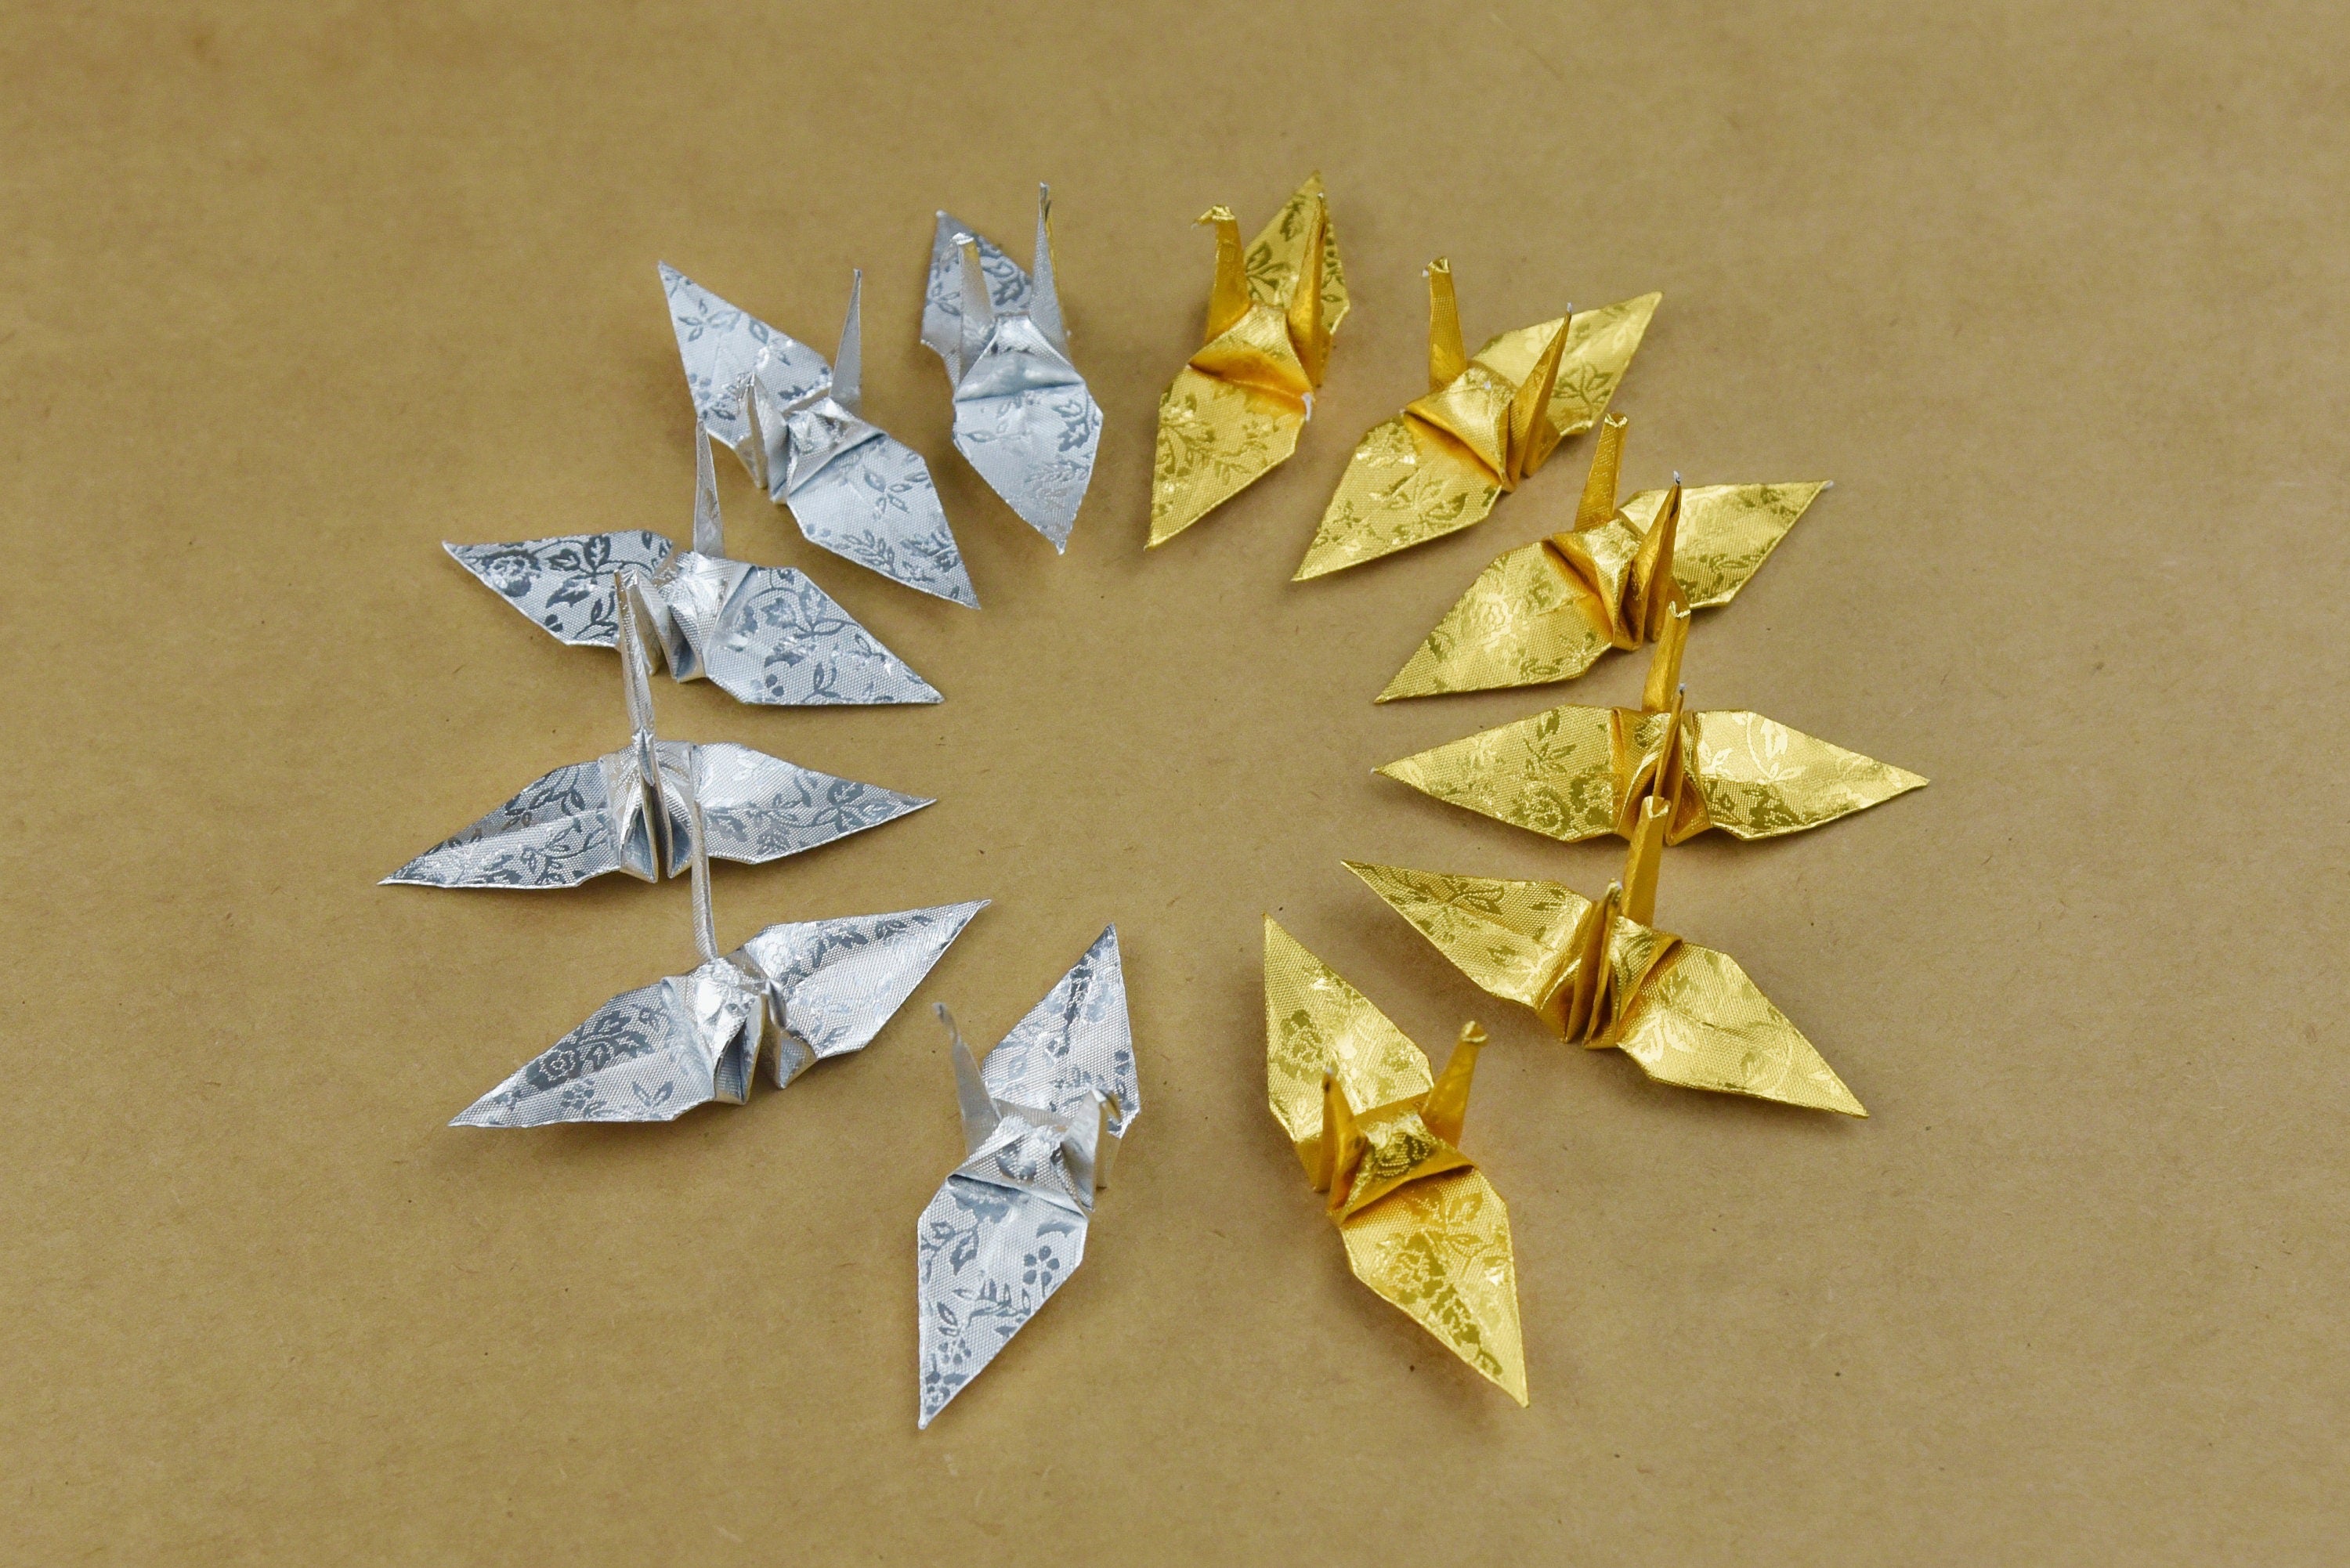 100 Origami Cranes Gold and Silver with Rose Pattern 7.5cm (3 inches) for Wedding Decoration, Japanese Wedding